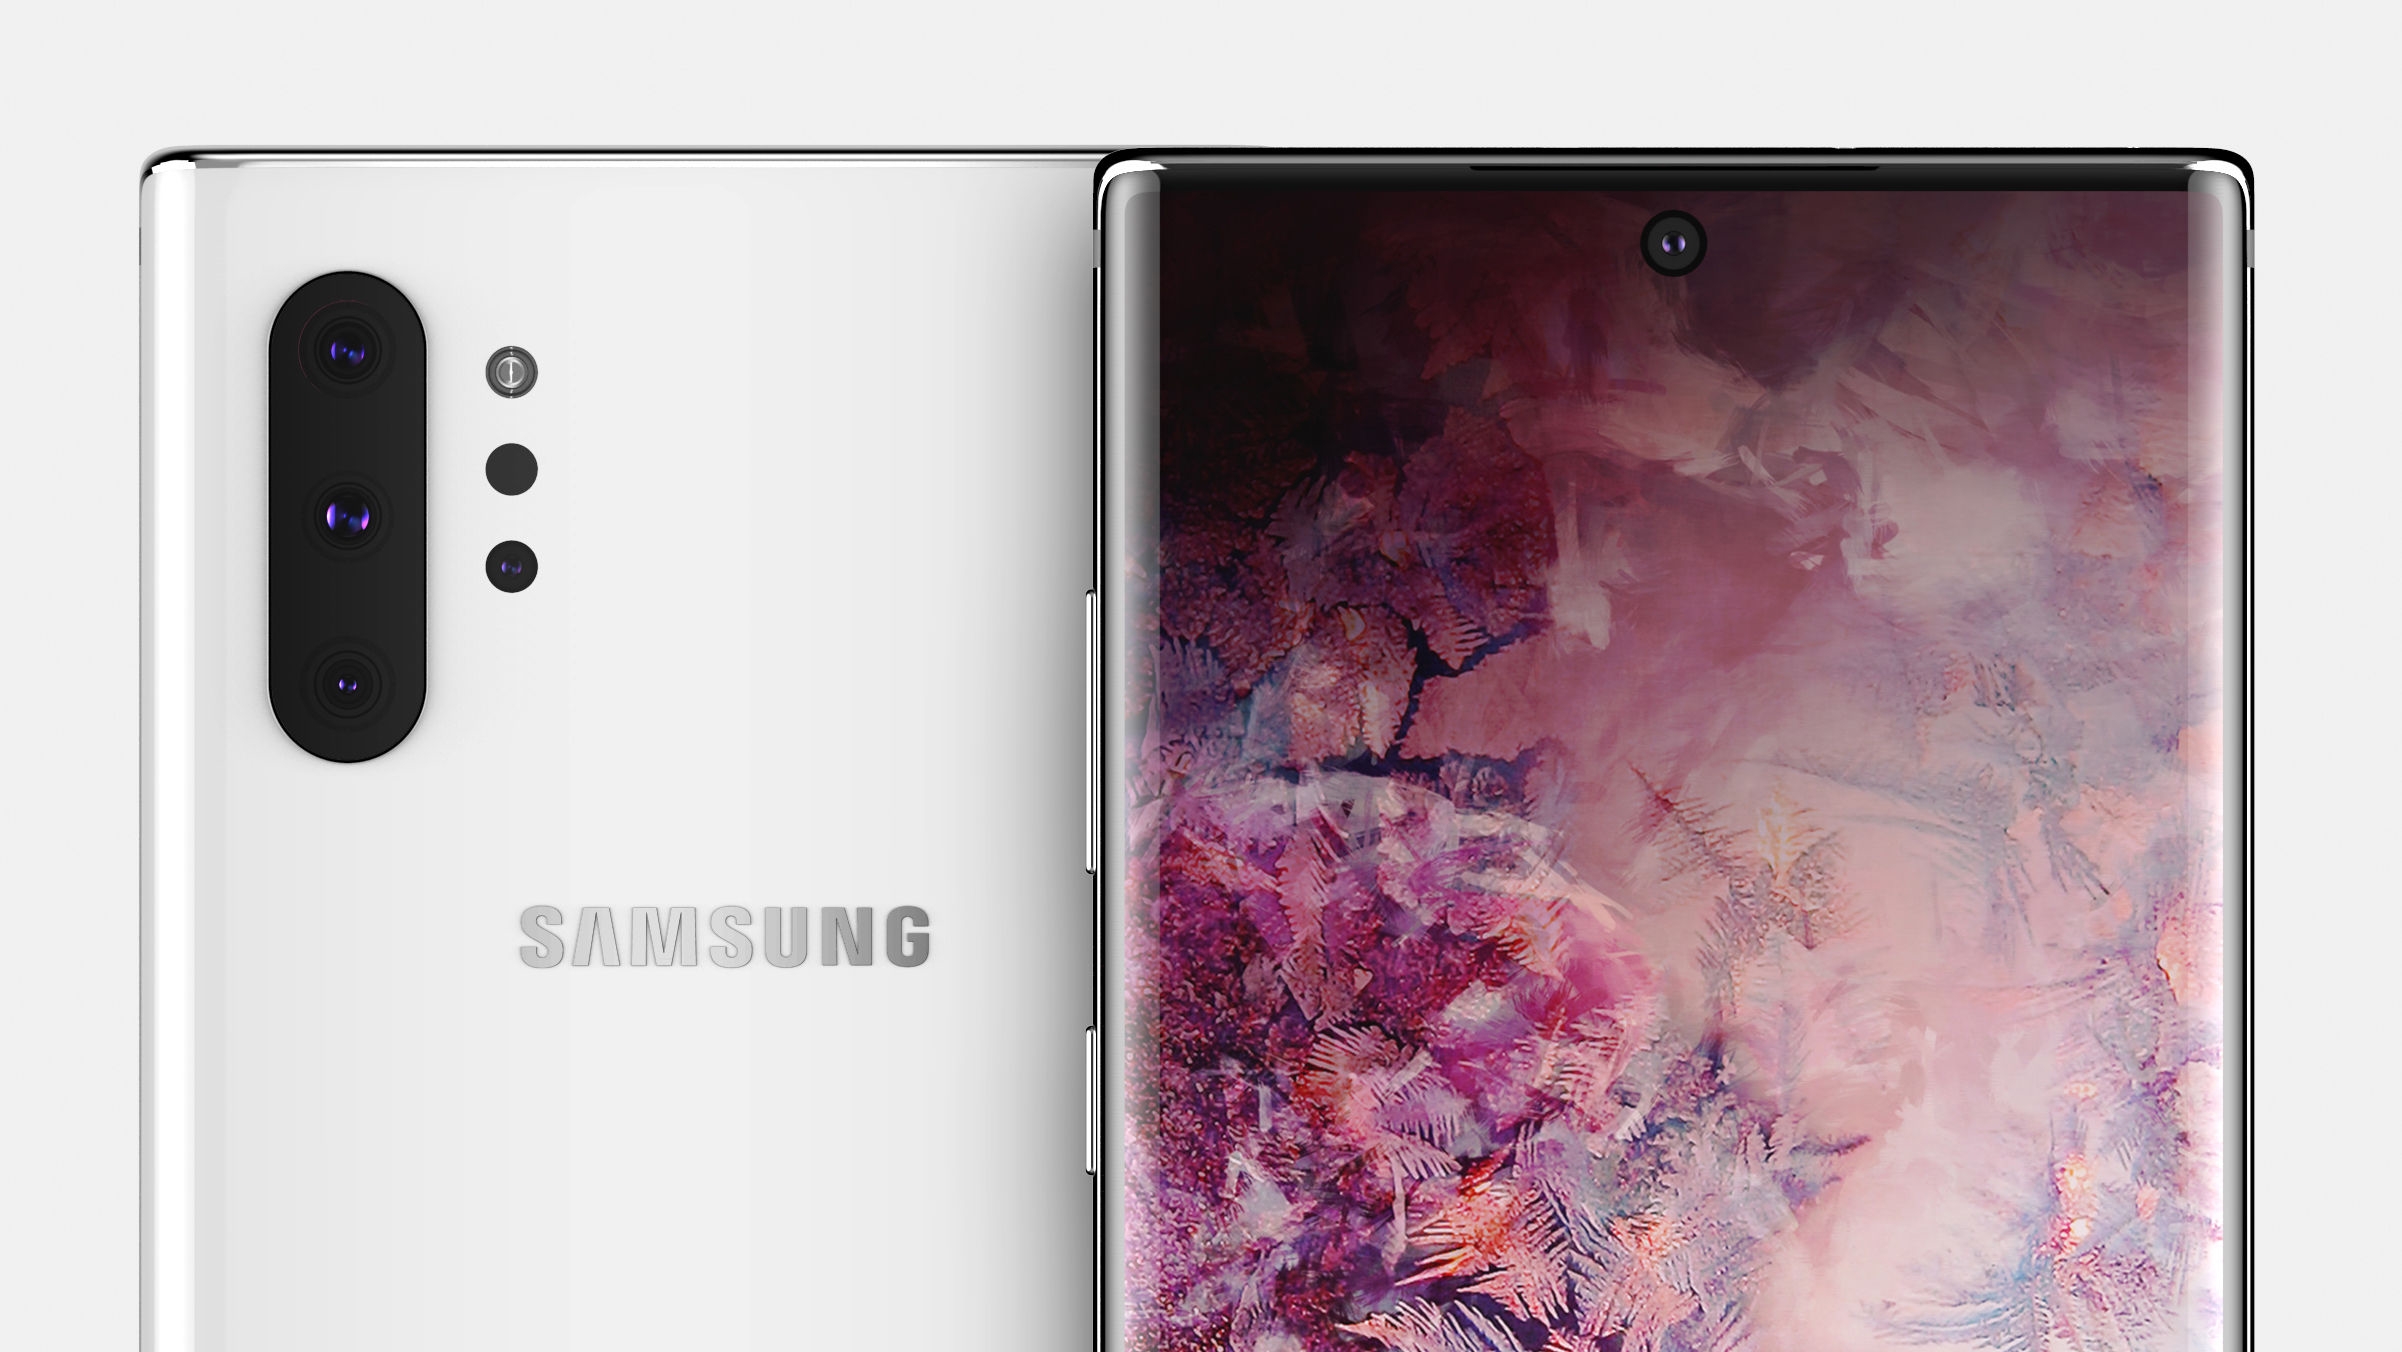 samsung kies for note 10.1